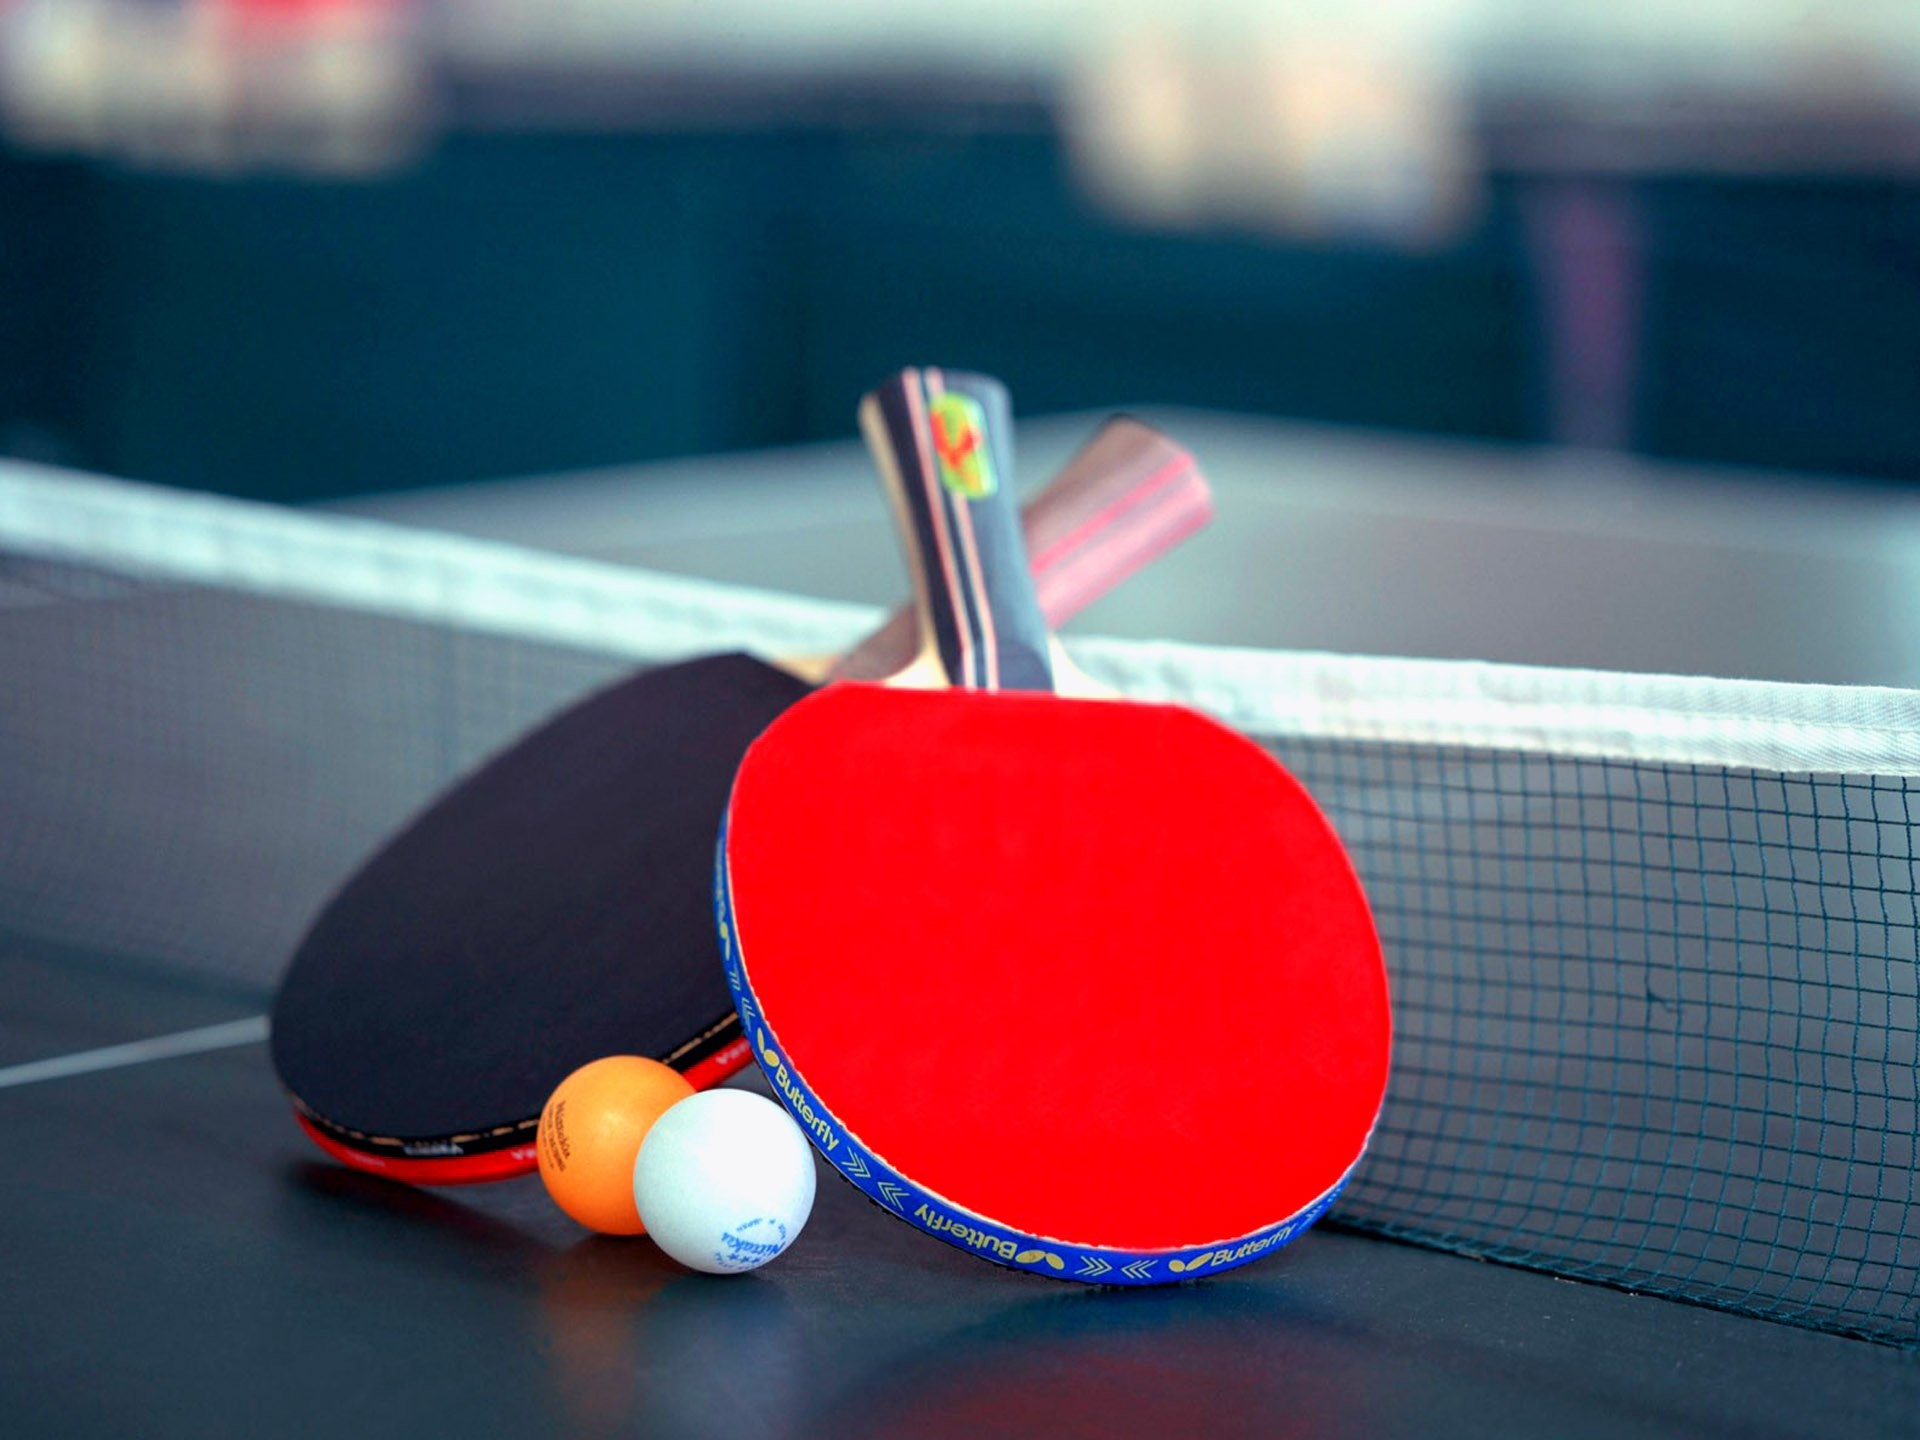 Table Tennis: Ping-pong table with a net, Rackets and plastic balls, Ping-pong equipment. 1920x1440 HD Background.